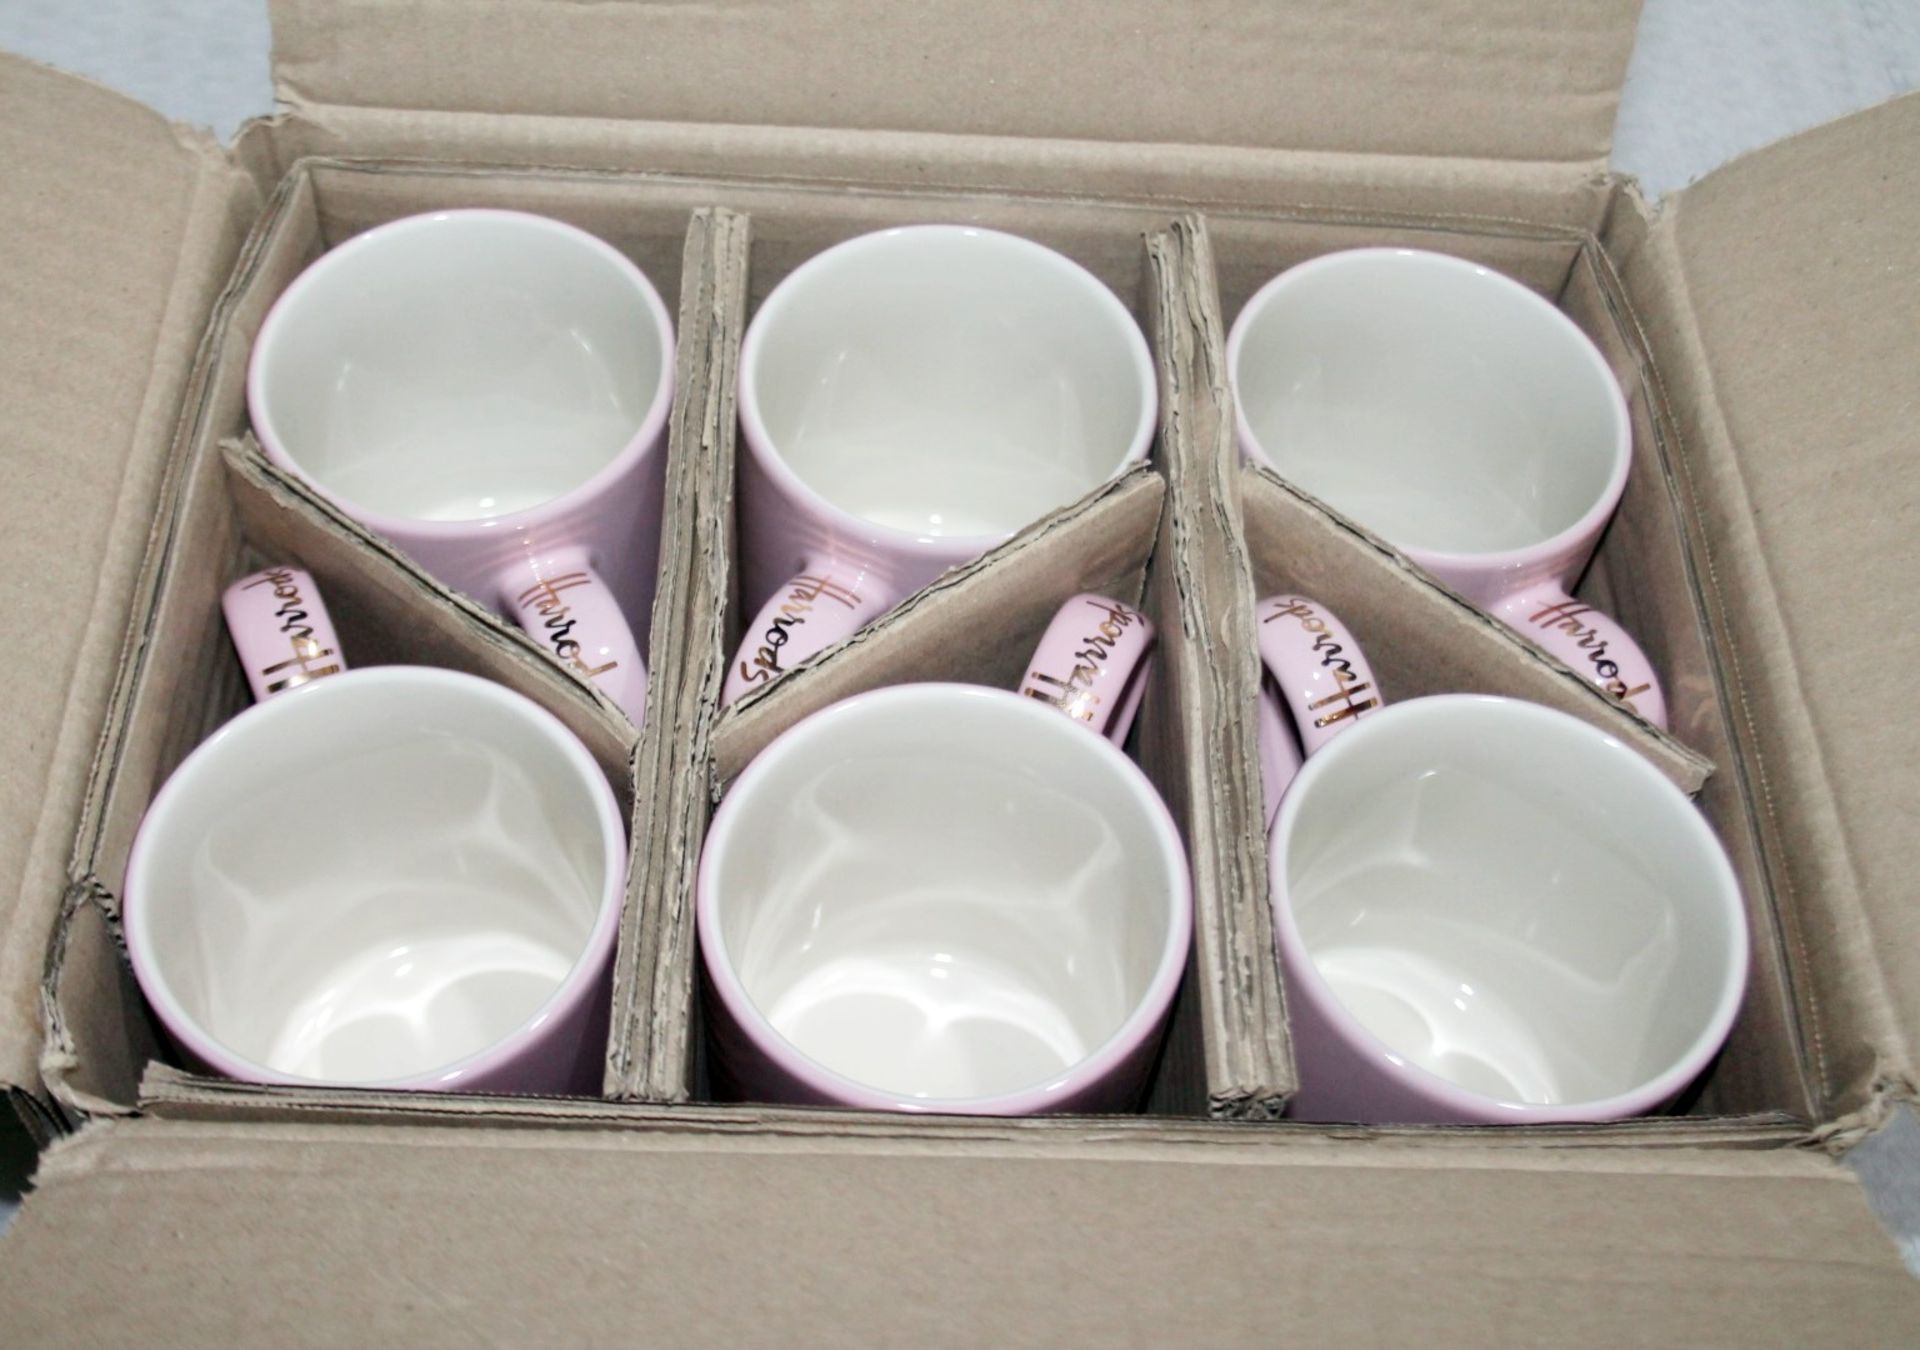 Set Of 6 x HARRODS Branded Mugs In Pink With Gold-Tone Logo Design - Dimensions: 9cm x 8cm - - Image 7 of 7